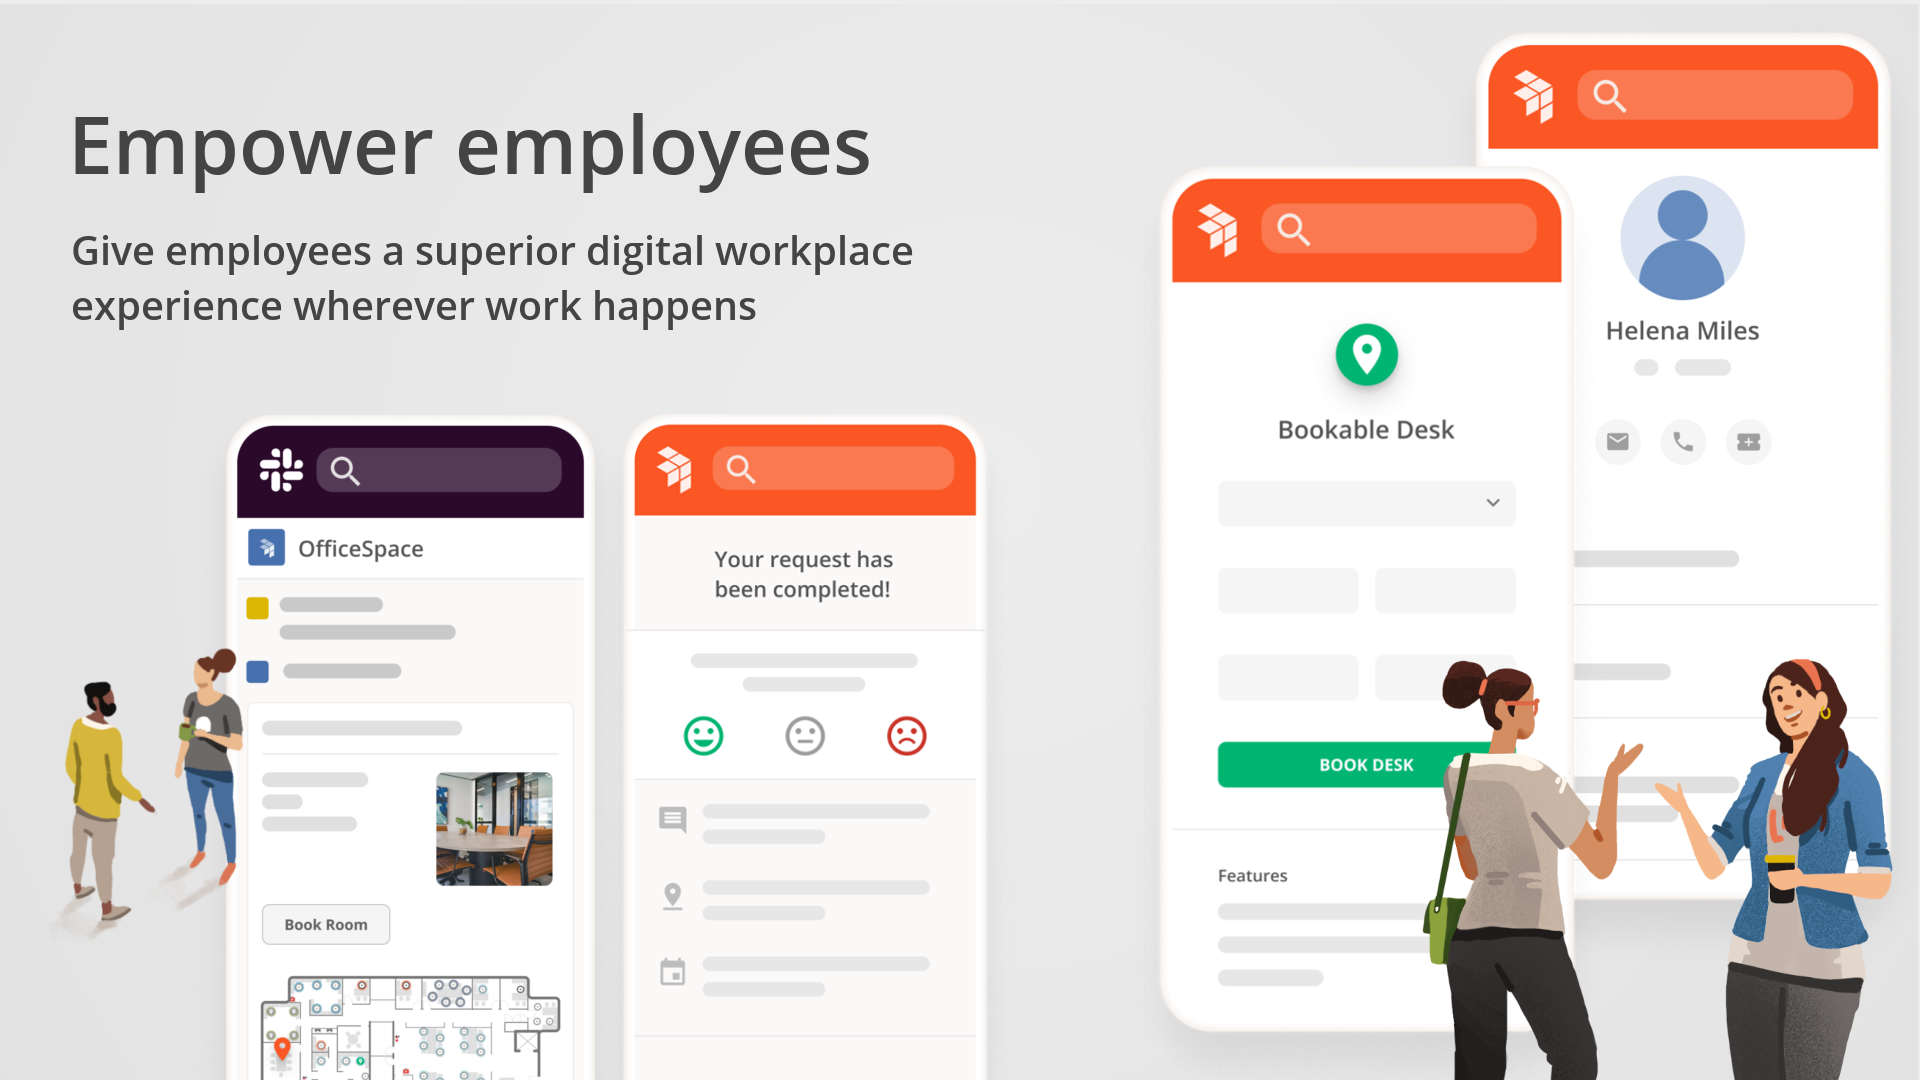 Help your employees find, book, and connect with everything they need via real-time workplace software that works on mobile app, Slack, and Microsoft Teams.